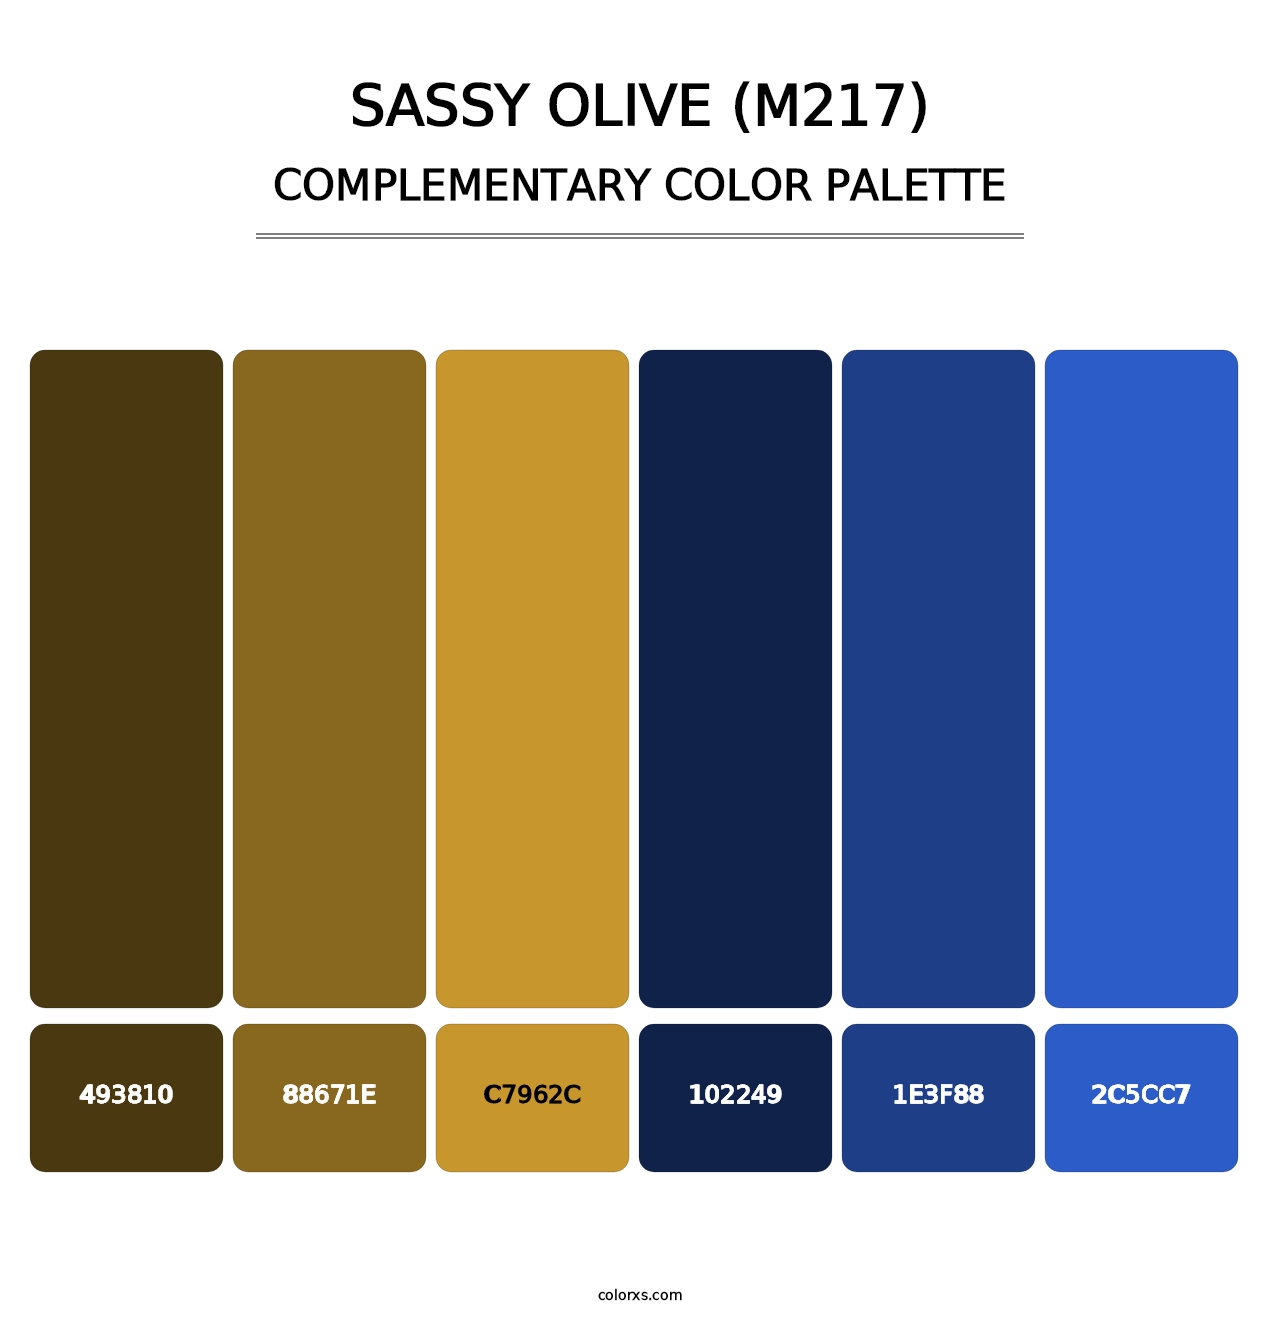 Sassy Olive (M217) - Complementary Color Palette